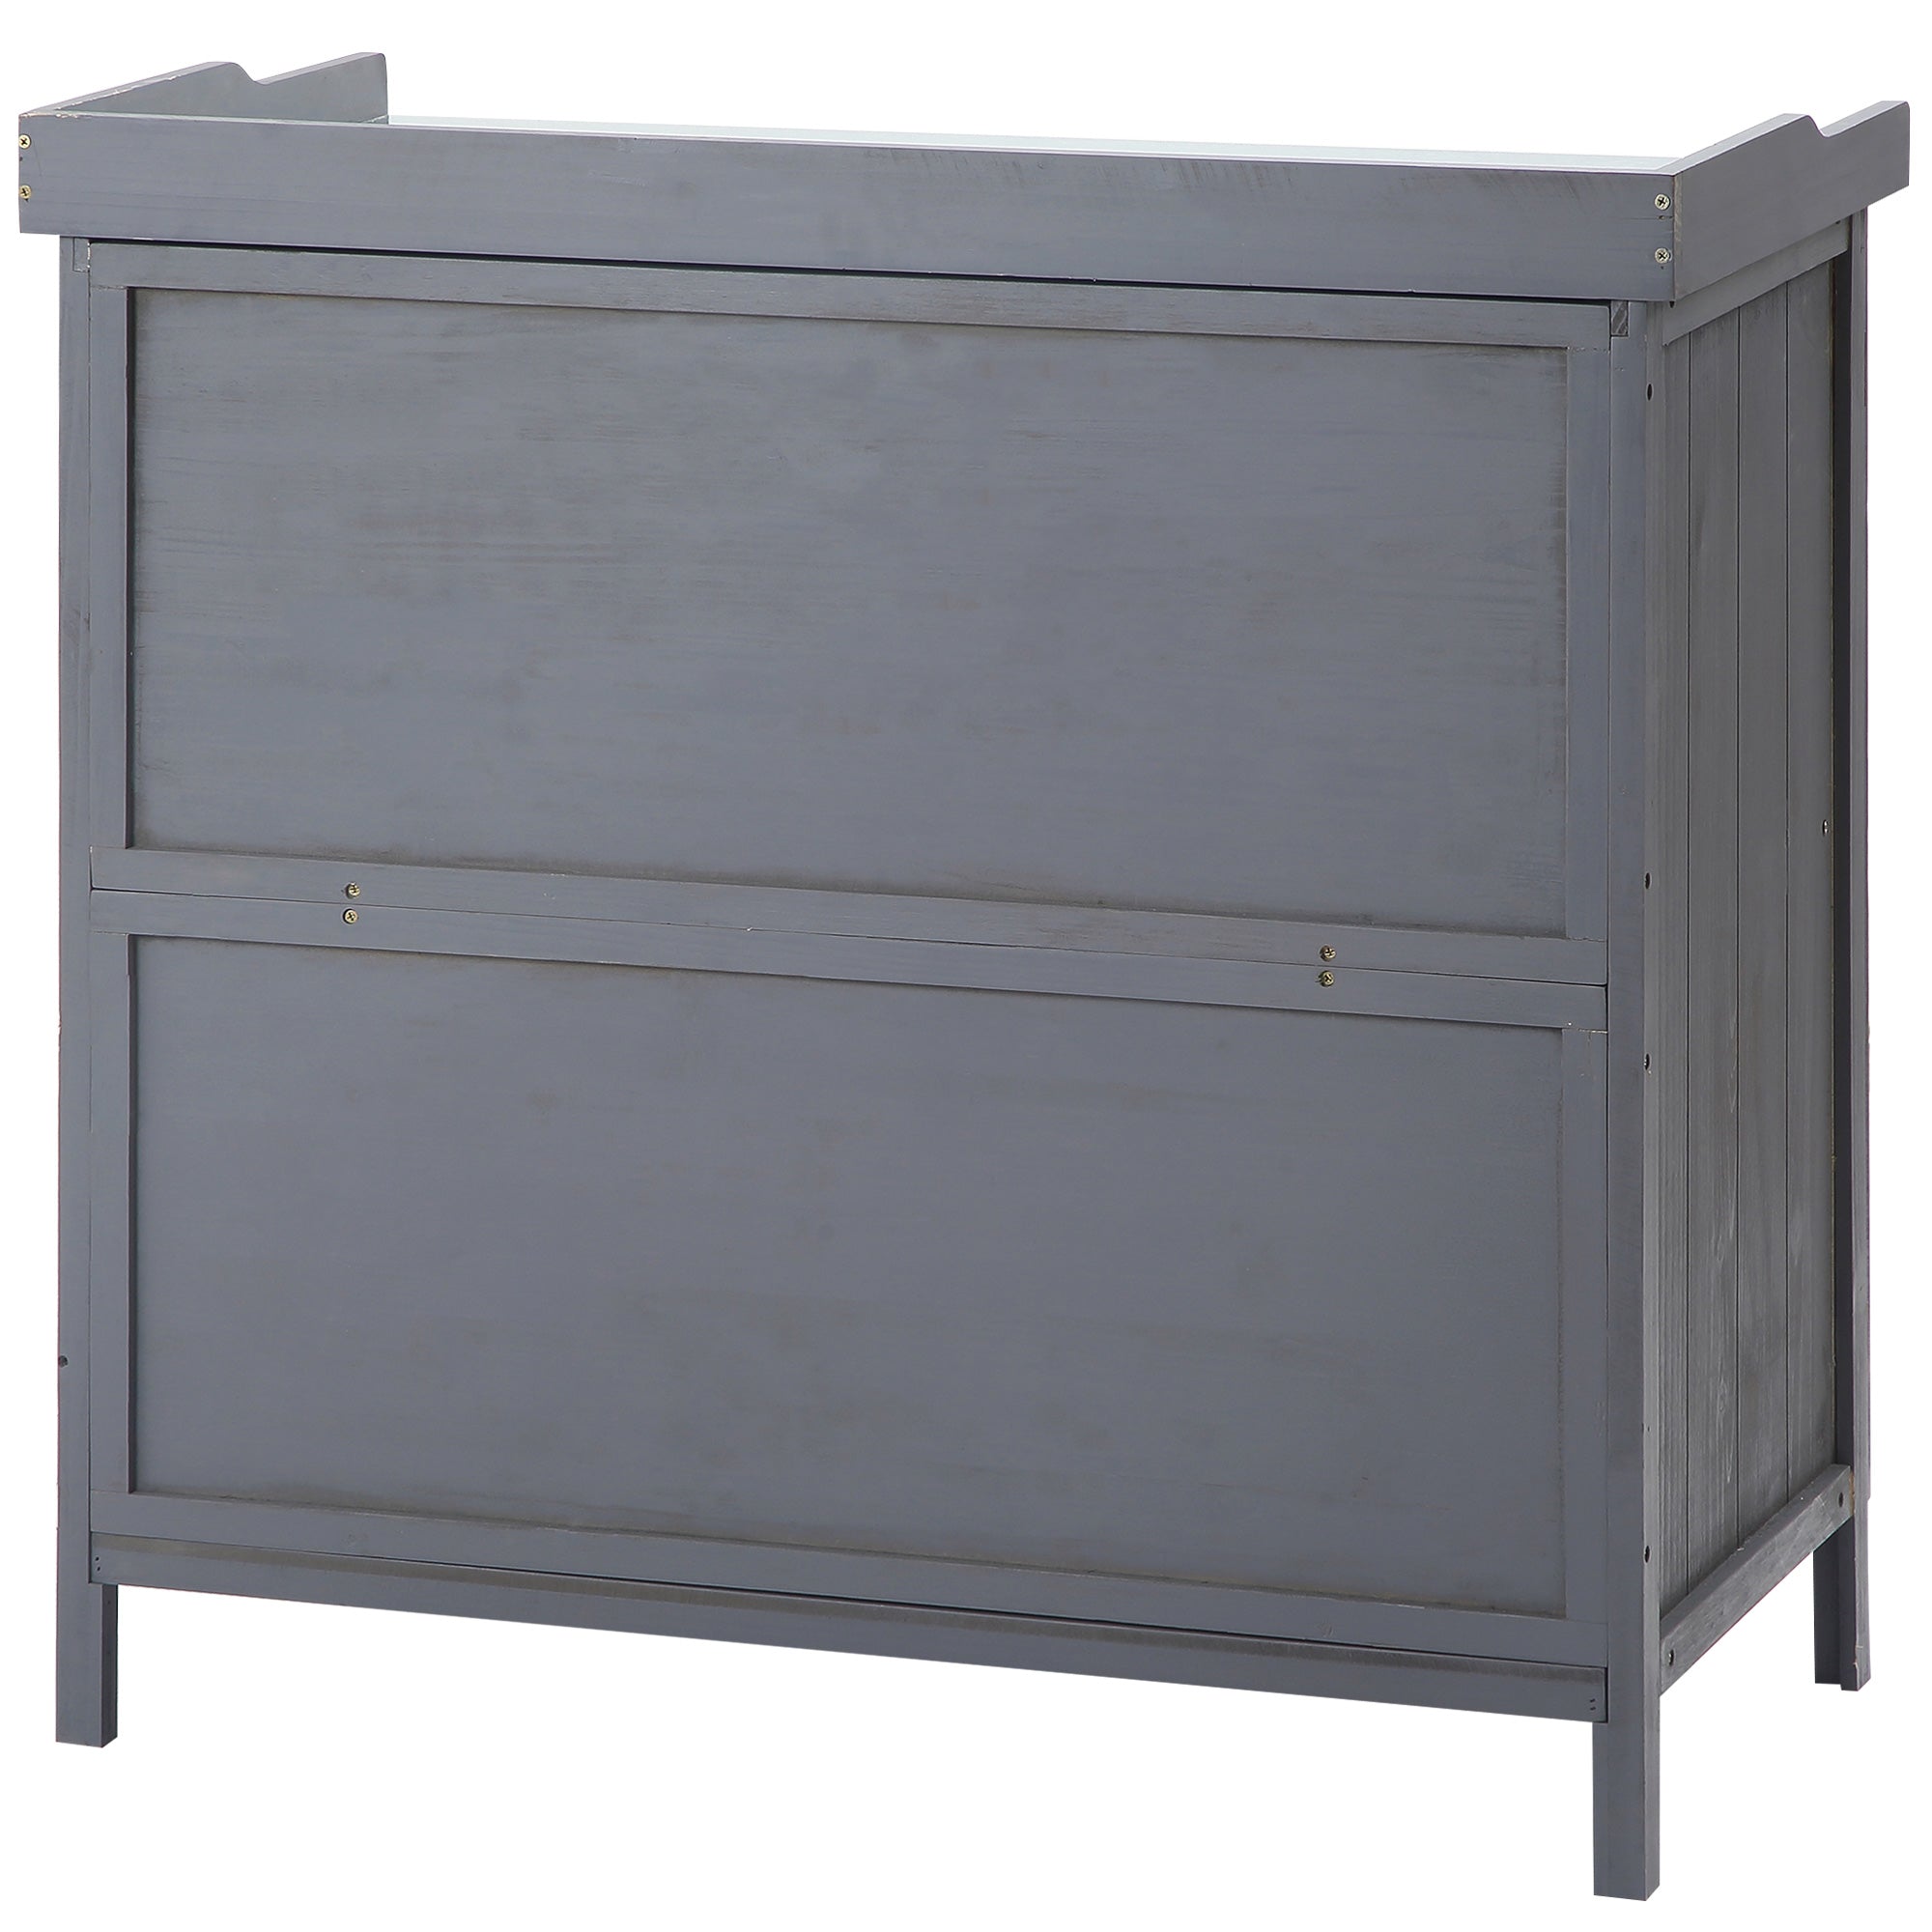 Outsunny Wooden Garden Storage Shed Tool Cabinet Organiser w/ Potting Bench Table, Two Shelves, 98 x 48 x 95.5 cm, Grey